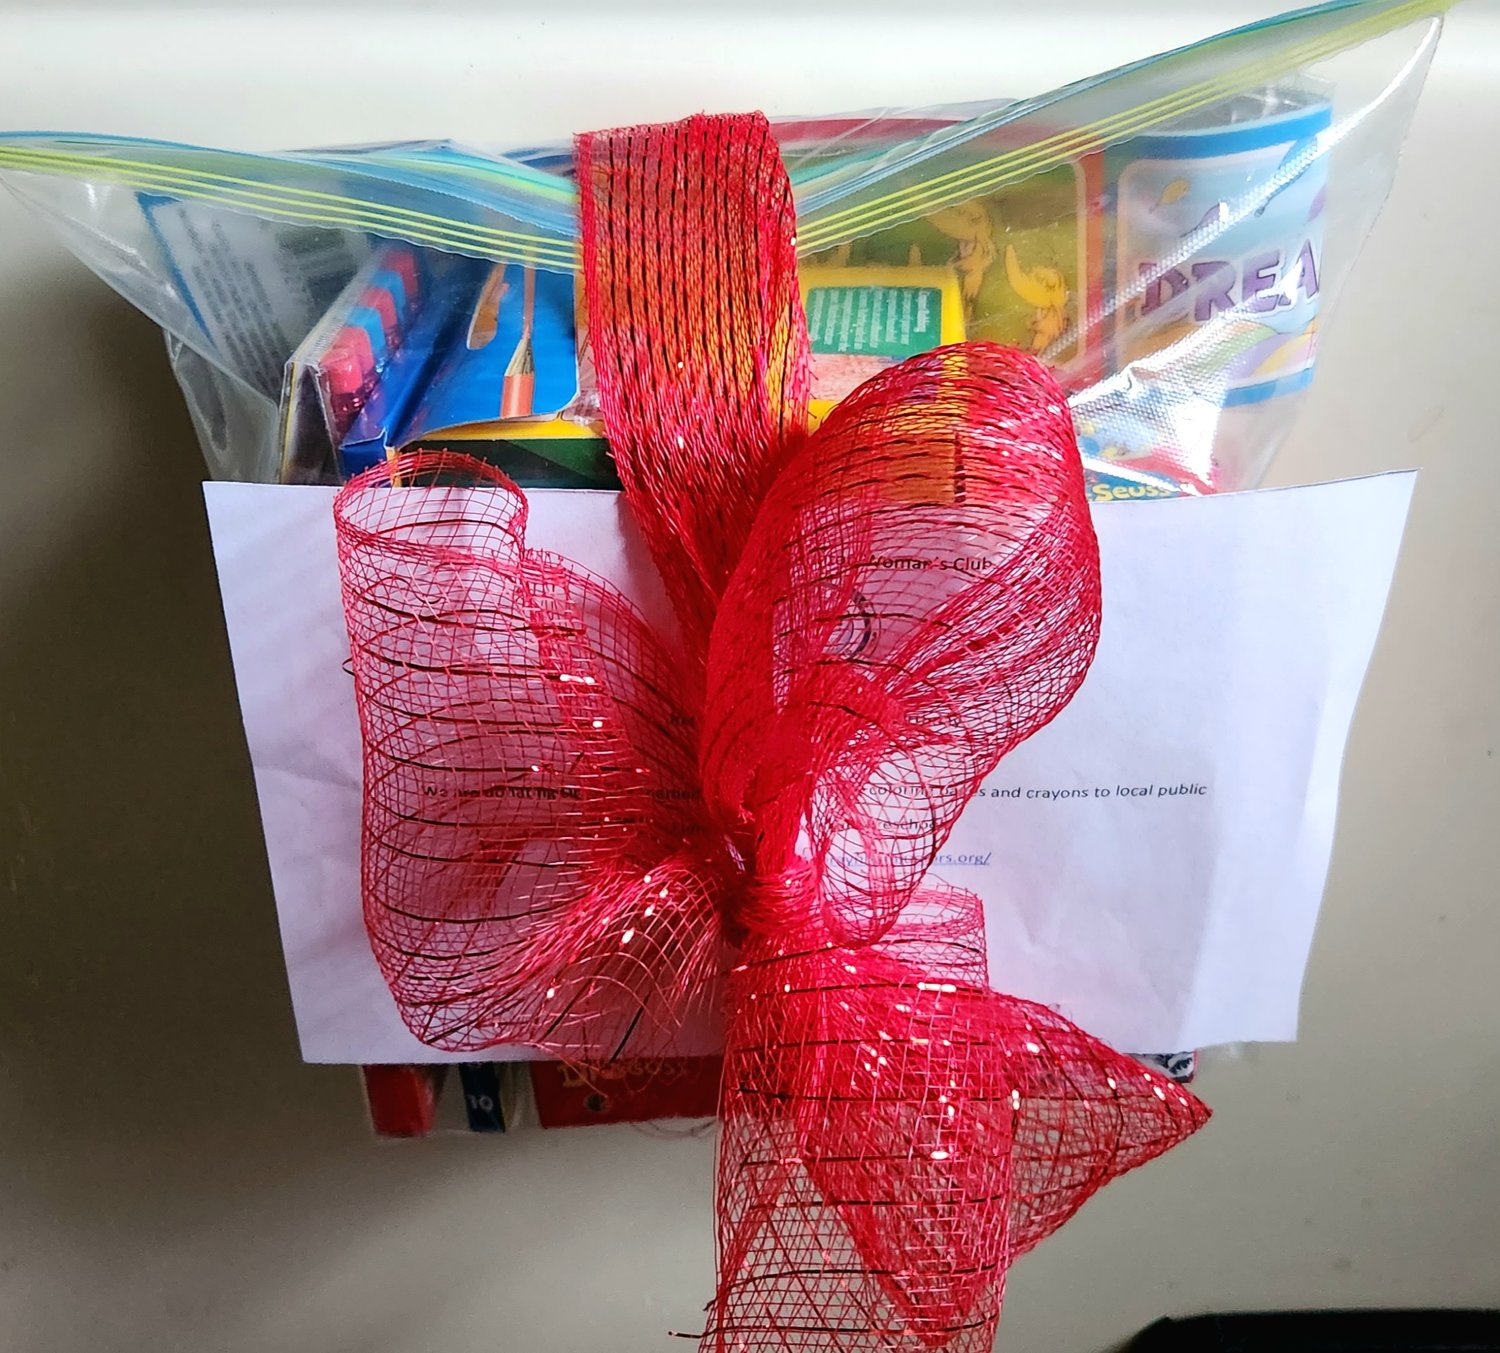 Dr. Suess packages wrapped in red ribbons.